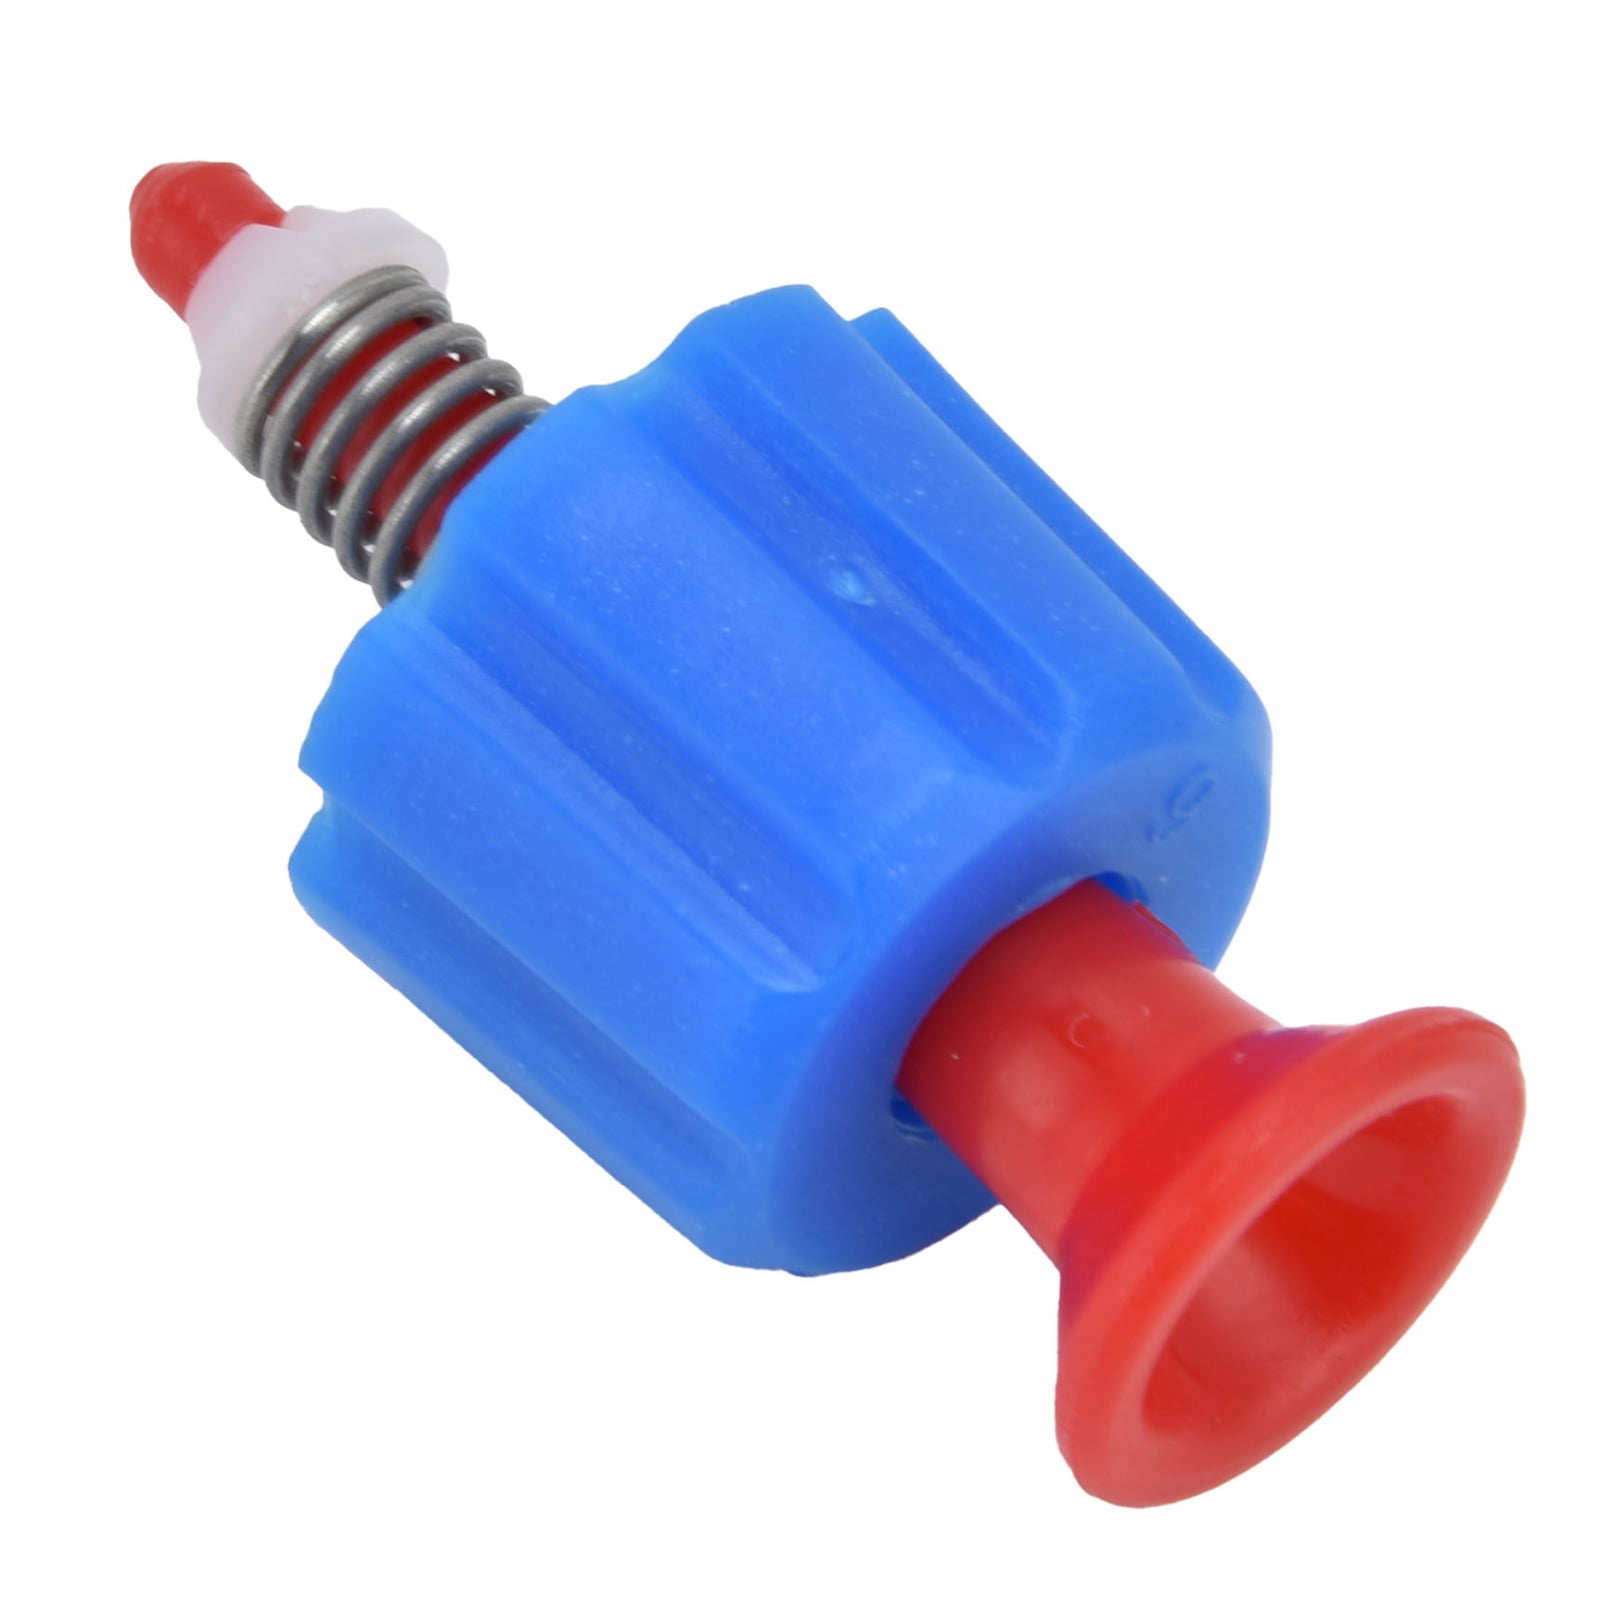 Garden Lawn Sprayer Replacement Parts Blue Automatic Pressure Relief Valve for 3l/5l/8l Backpack Sprayer Pressure Relief Valve for Pump Pressure Sprayer 2.0x0.9x0.9in 